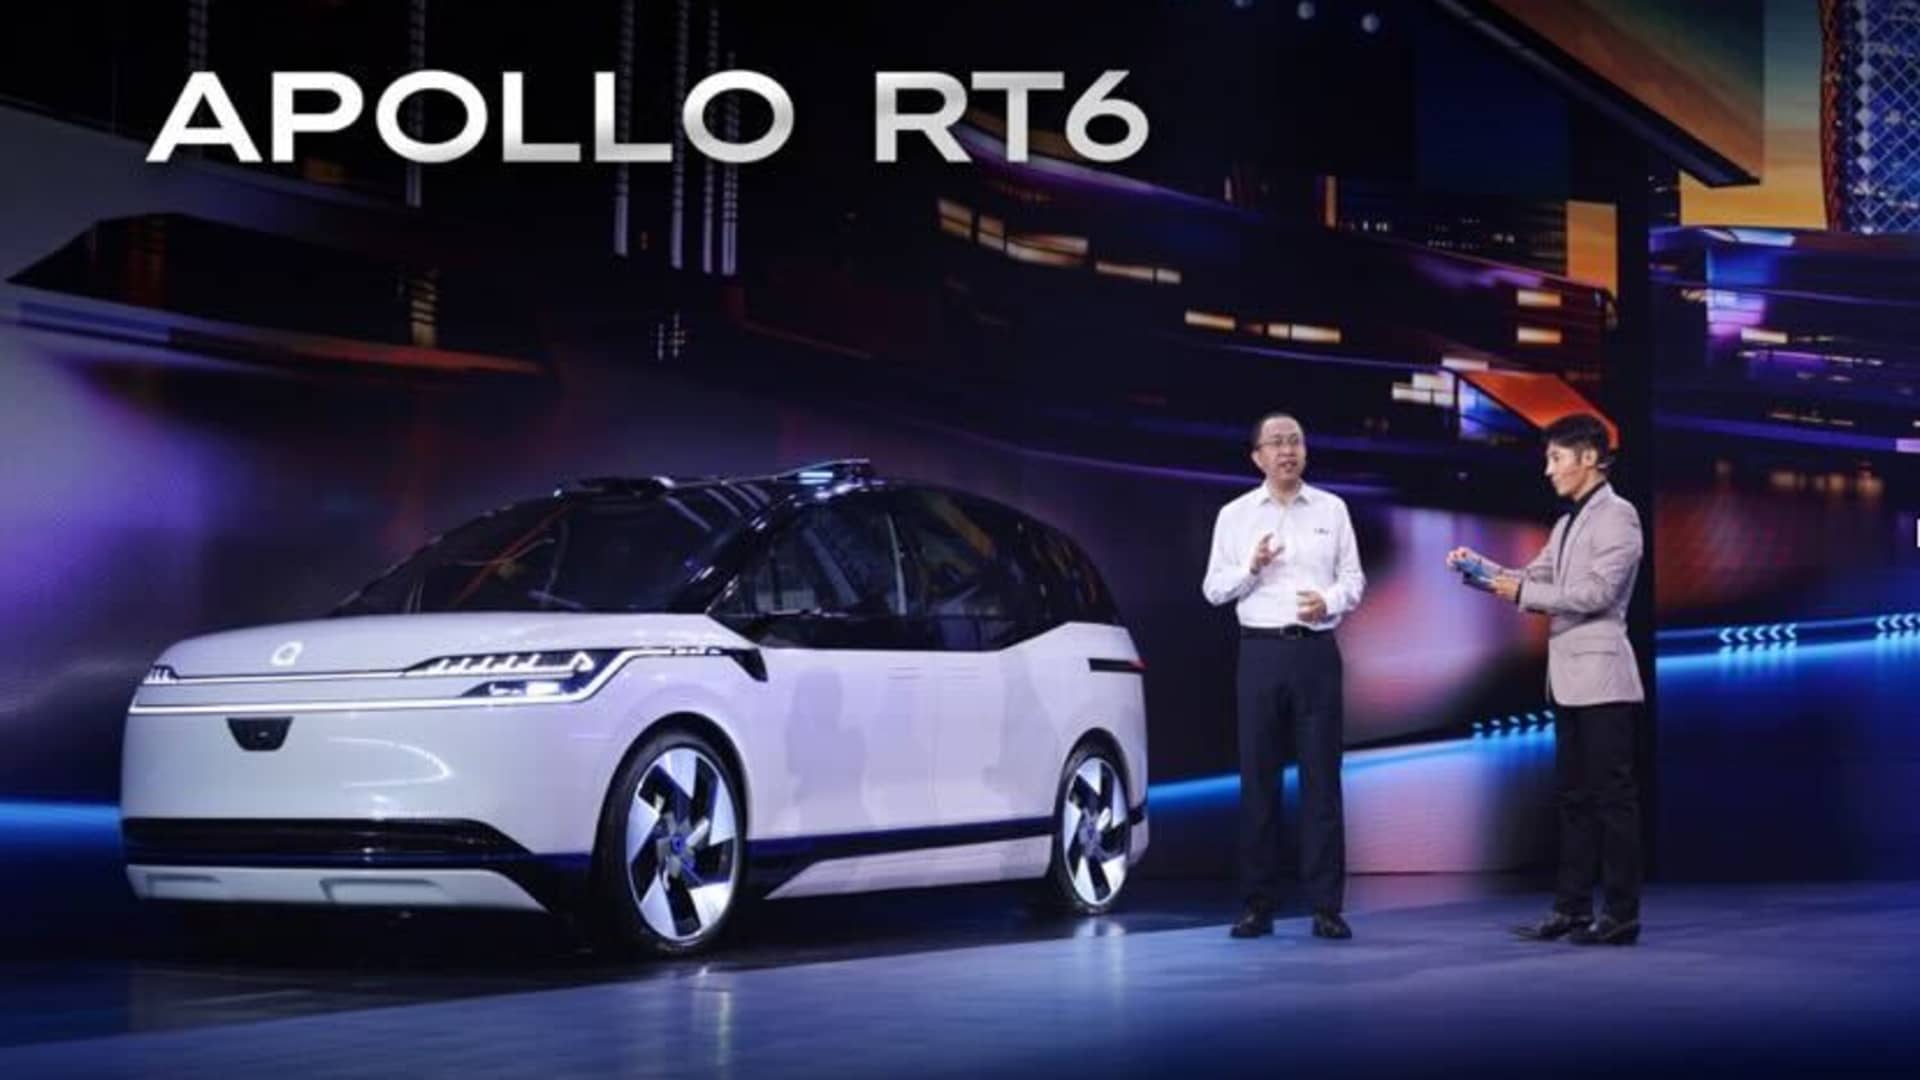 Baidu’s new robotaxi can drive without a steering wheel and is 50% cheaper – CNBC